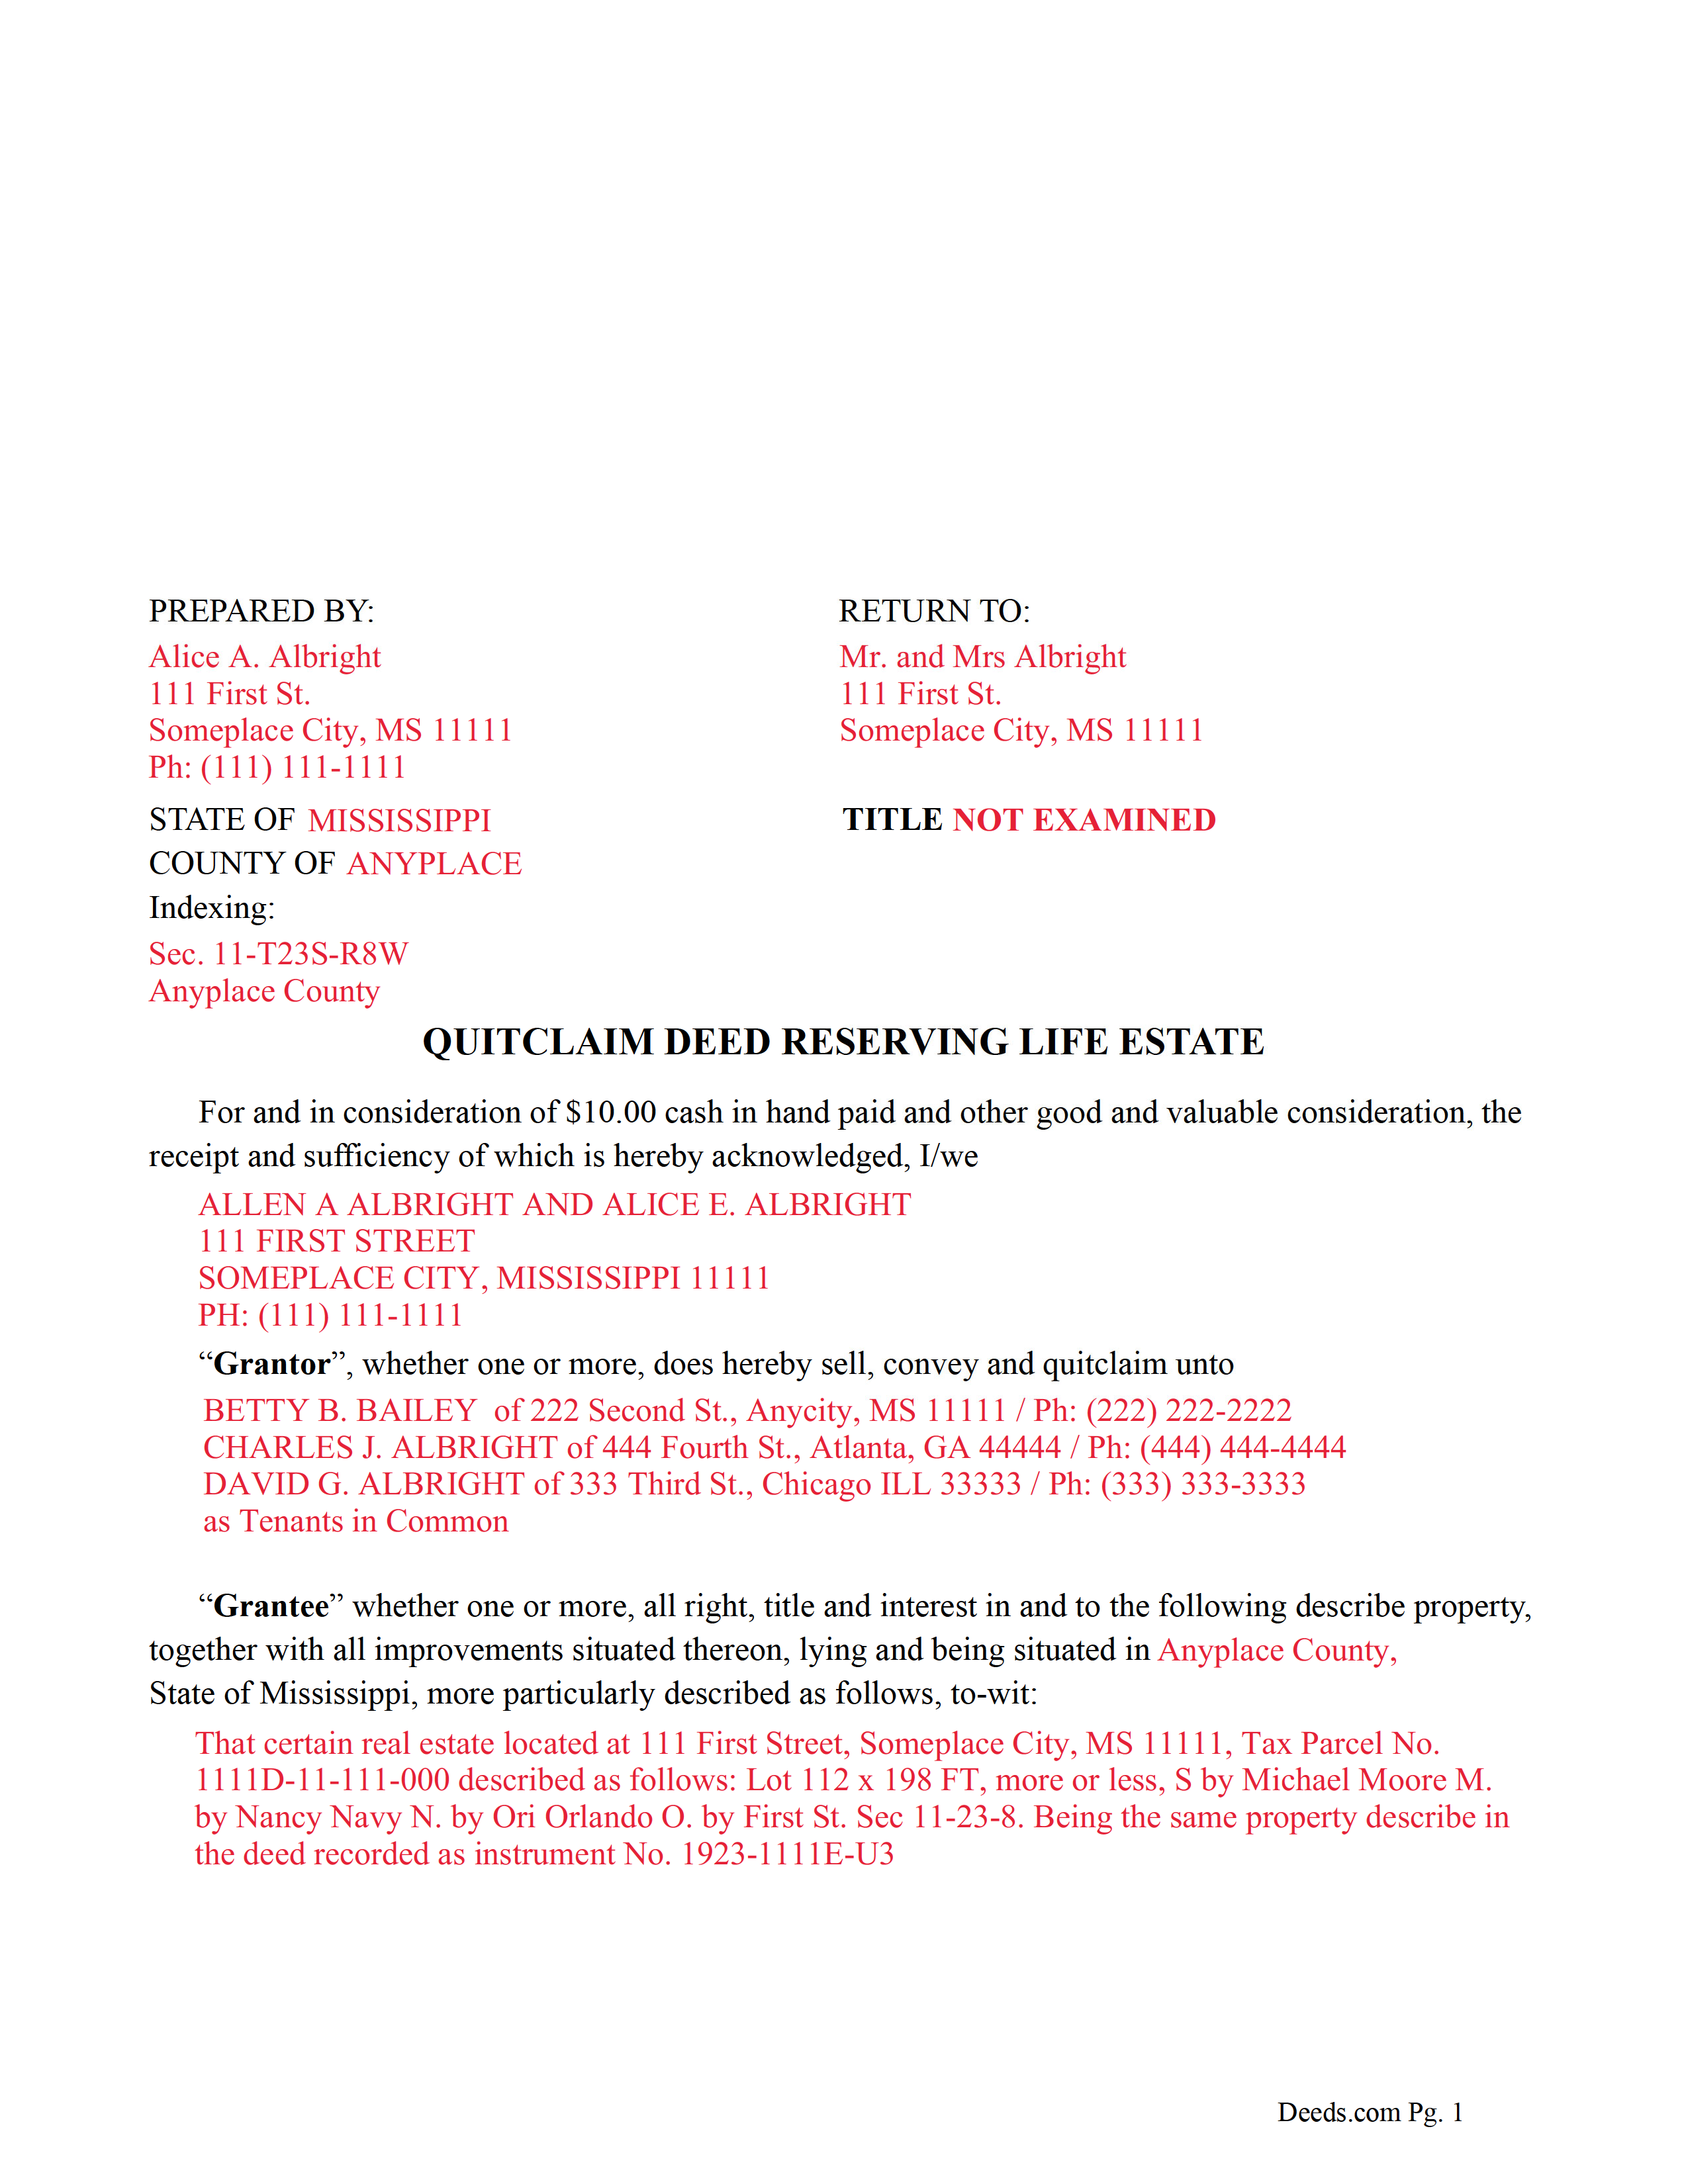 Completed Example of the Quitclaim Deed Reserving Life Estate Document